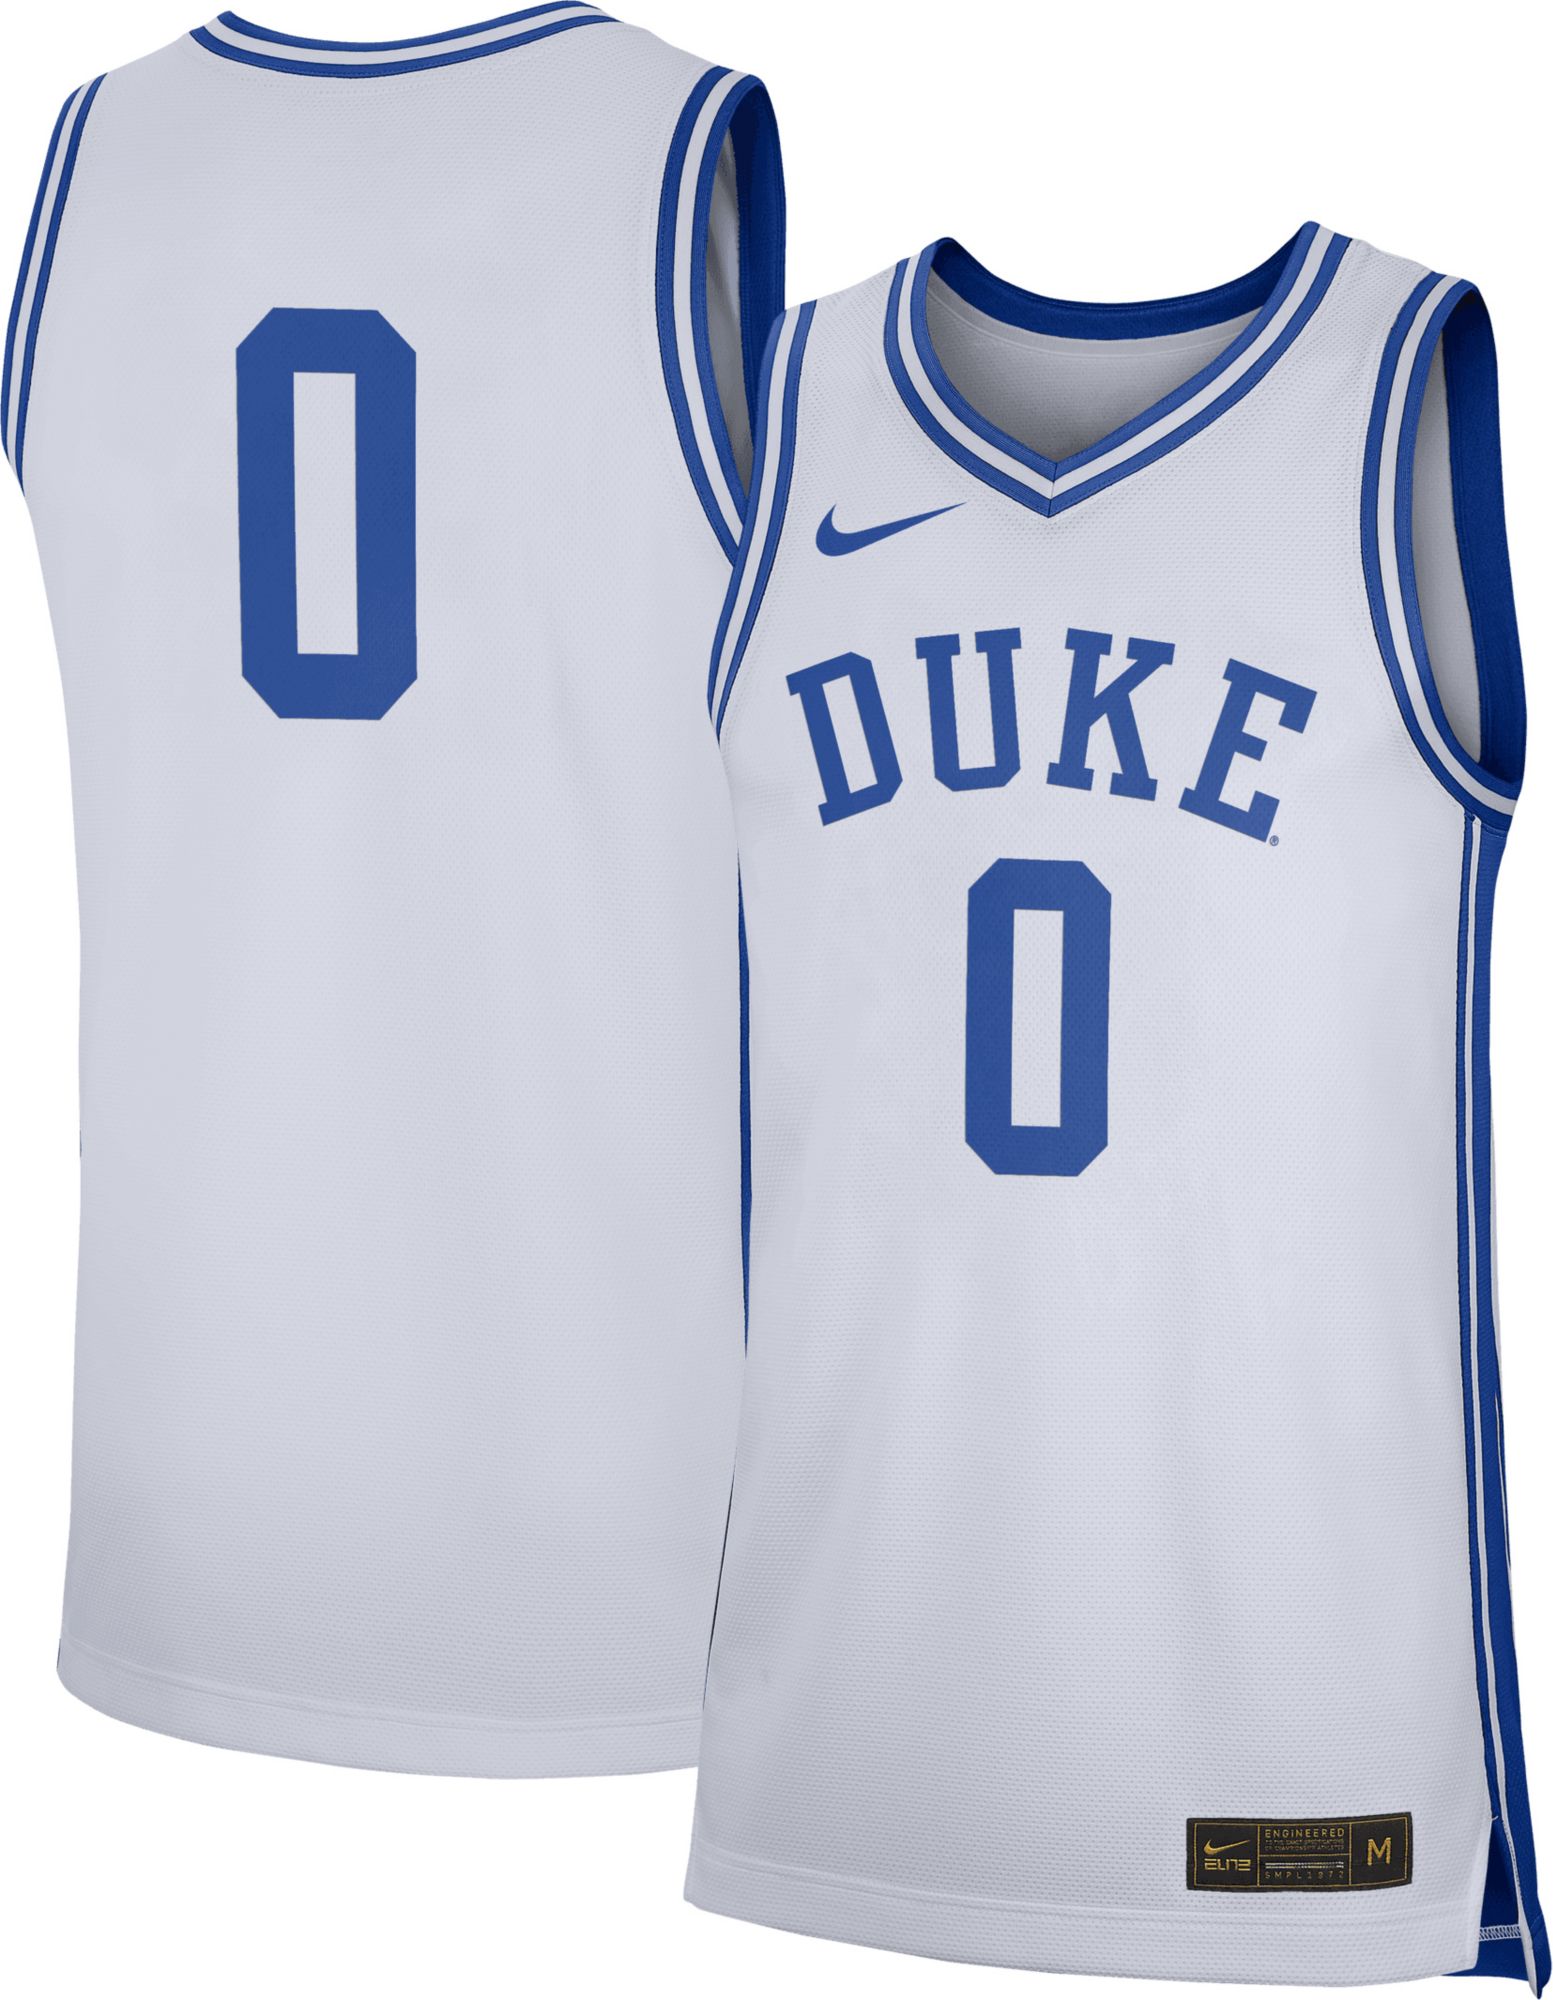 Duke Blue Devils Jerseys  Curbside Pickup Available at DICK'S